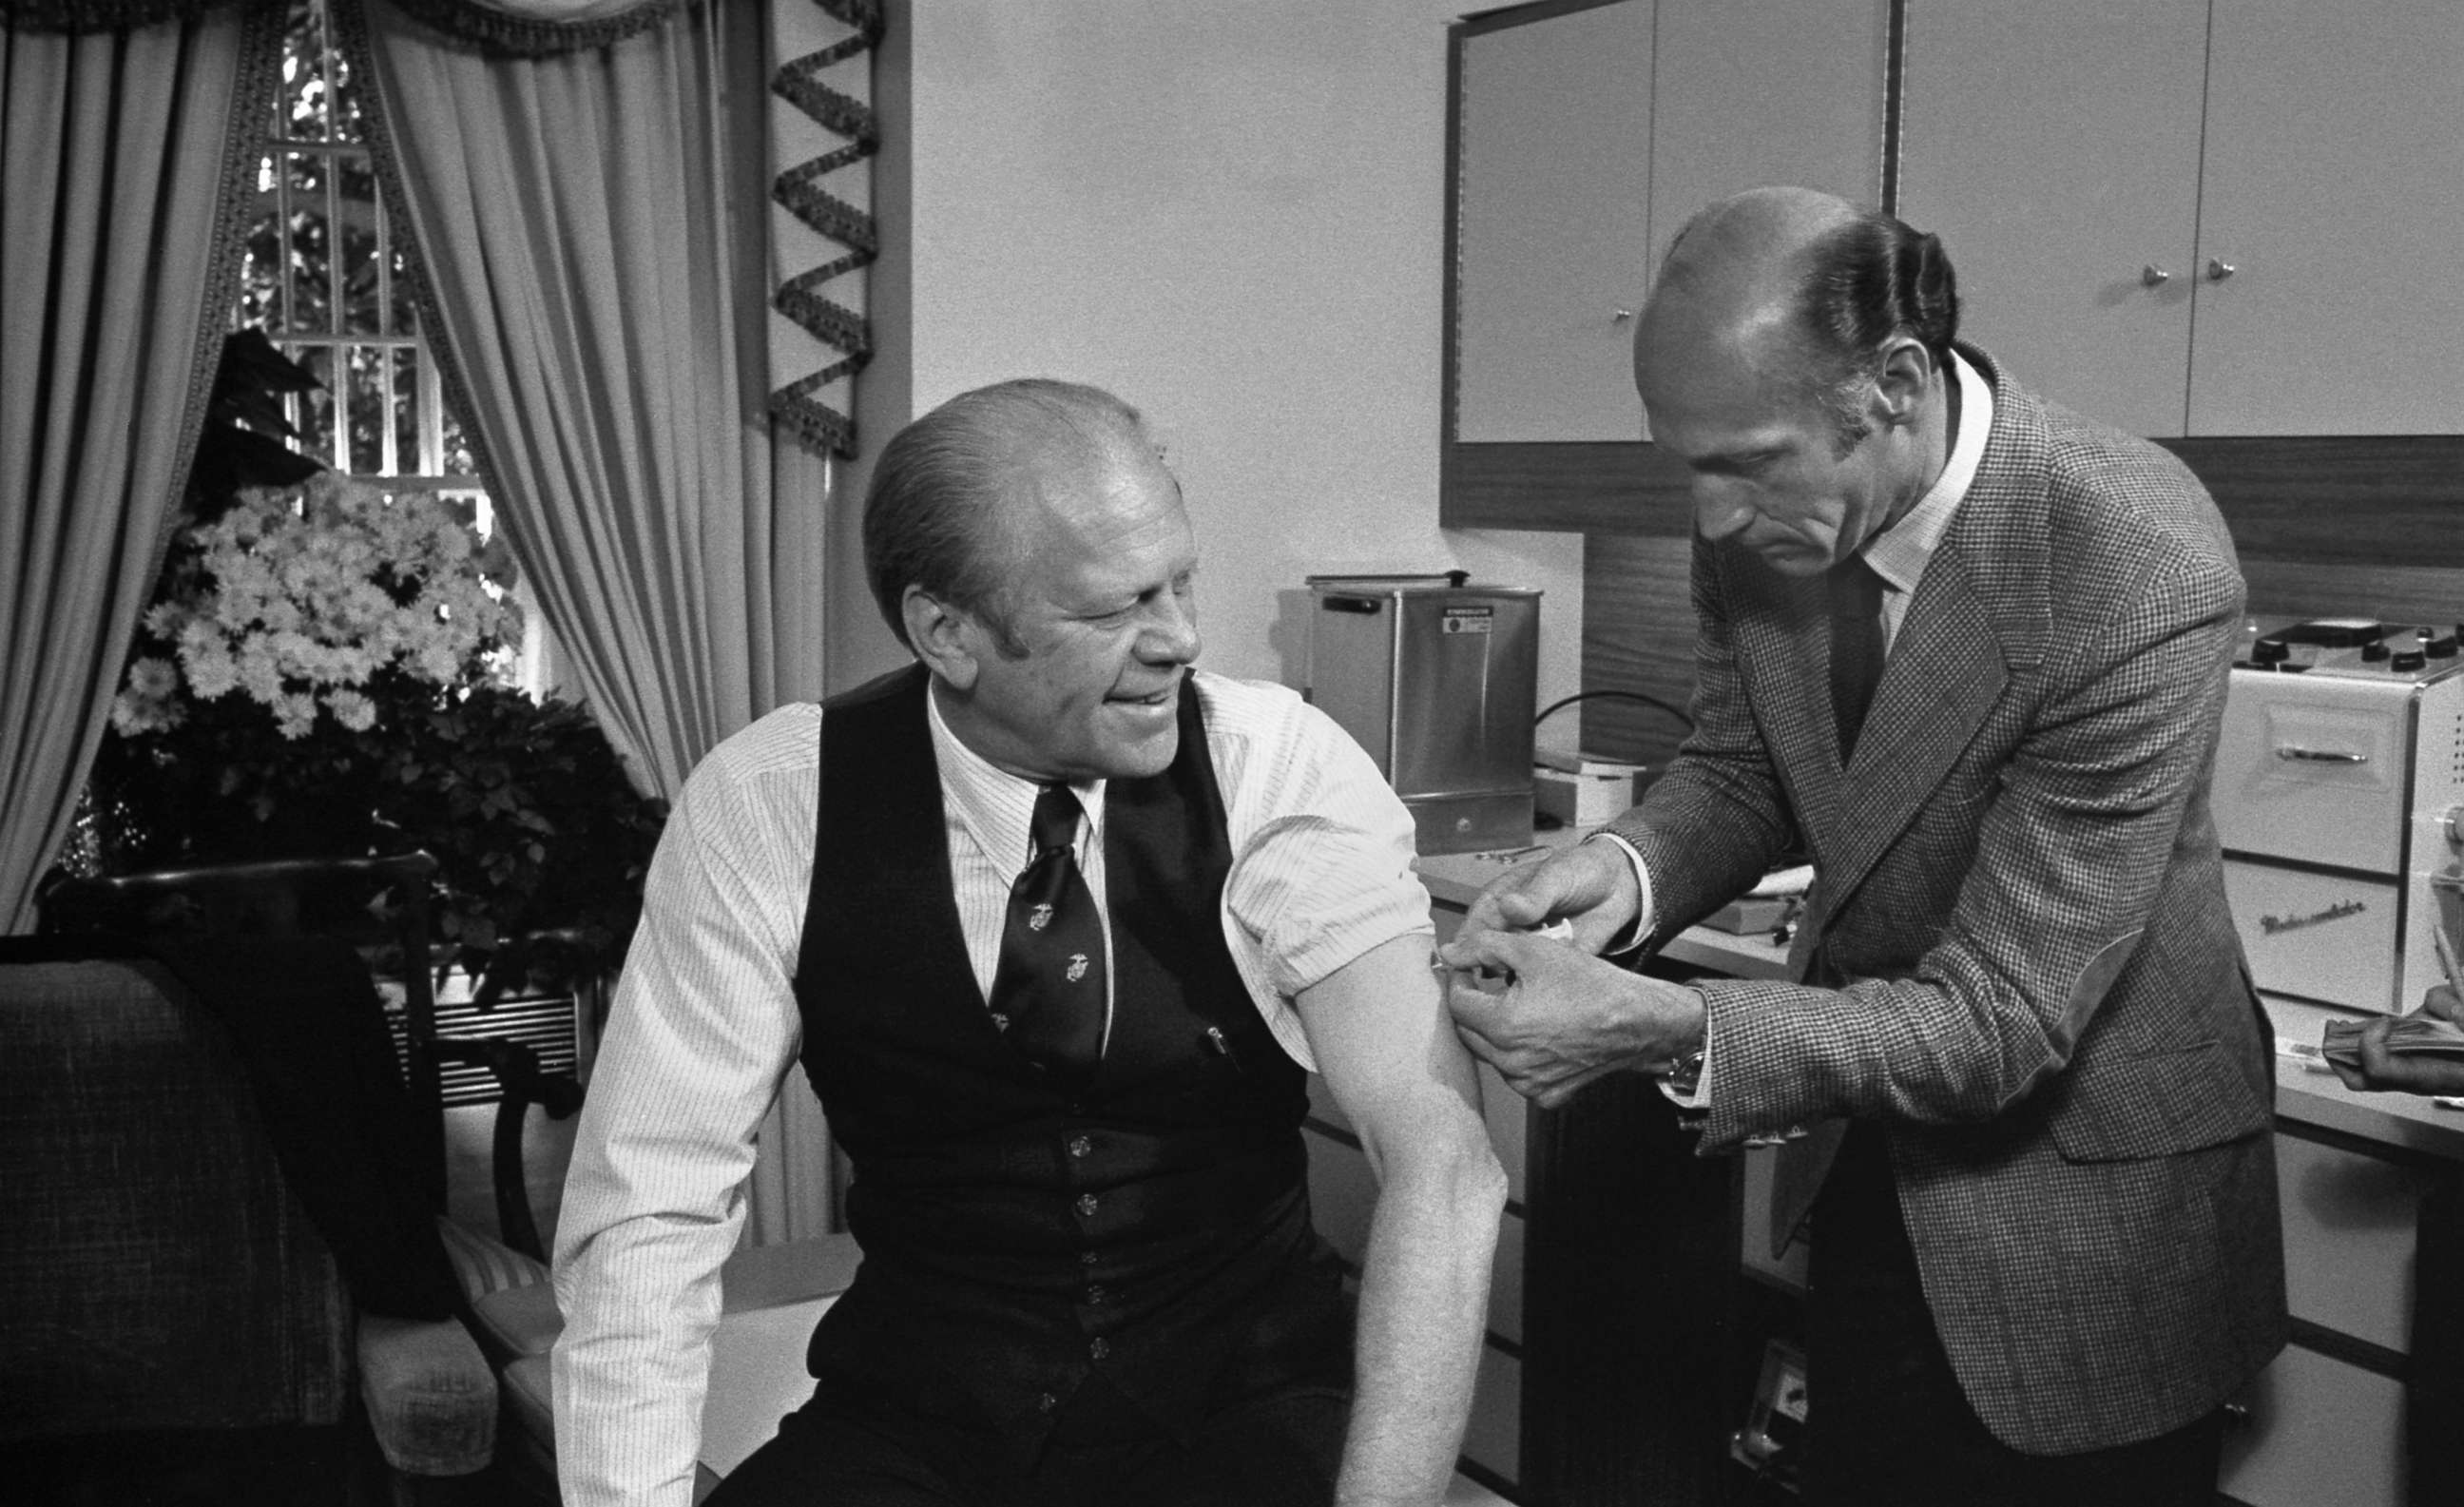 PHOTO: President Gerald Ford, his sleeve rolled up, is injected with a swine flu inoculation by White House physician Dr. William Lukash, Washington D.C., Oct. 14, 1976.